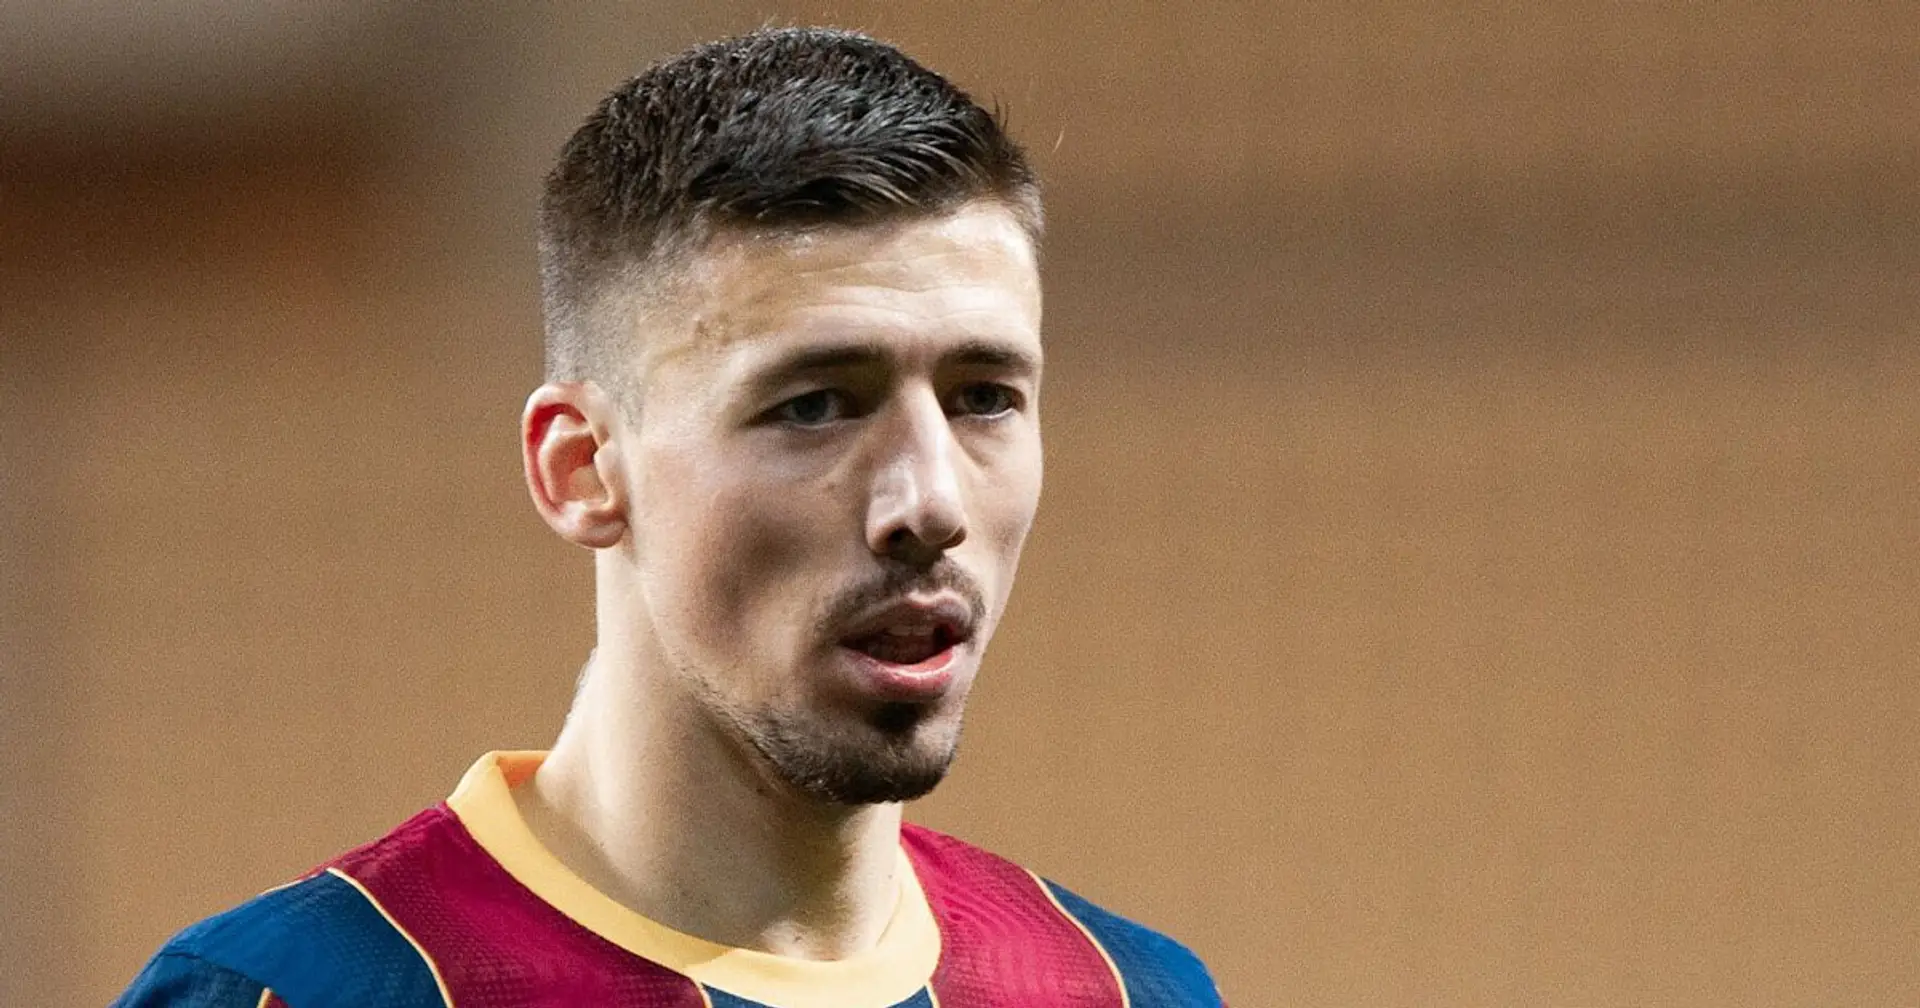 Lenglet intends to continue at Barca despite Arsenal and Spurs interest (reliability: 5 stars)